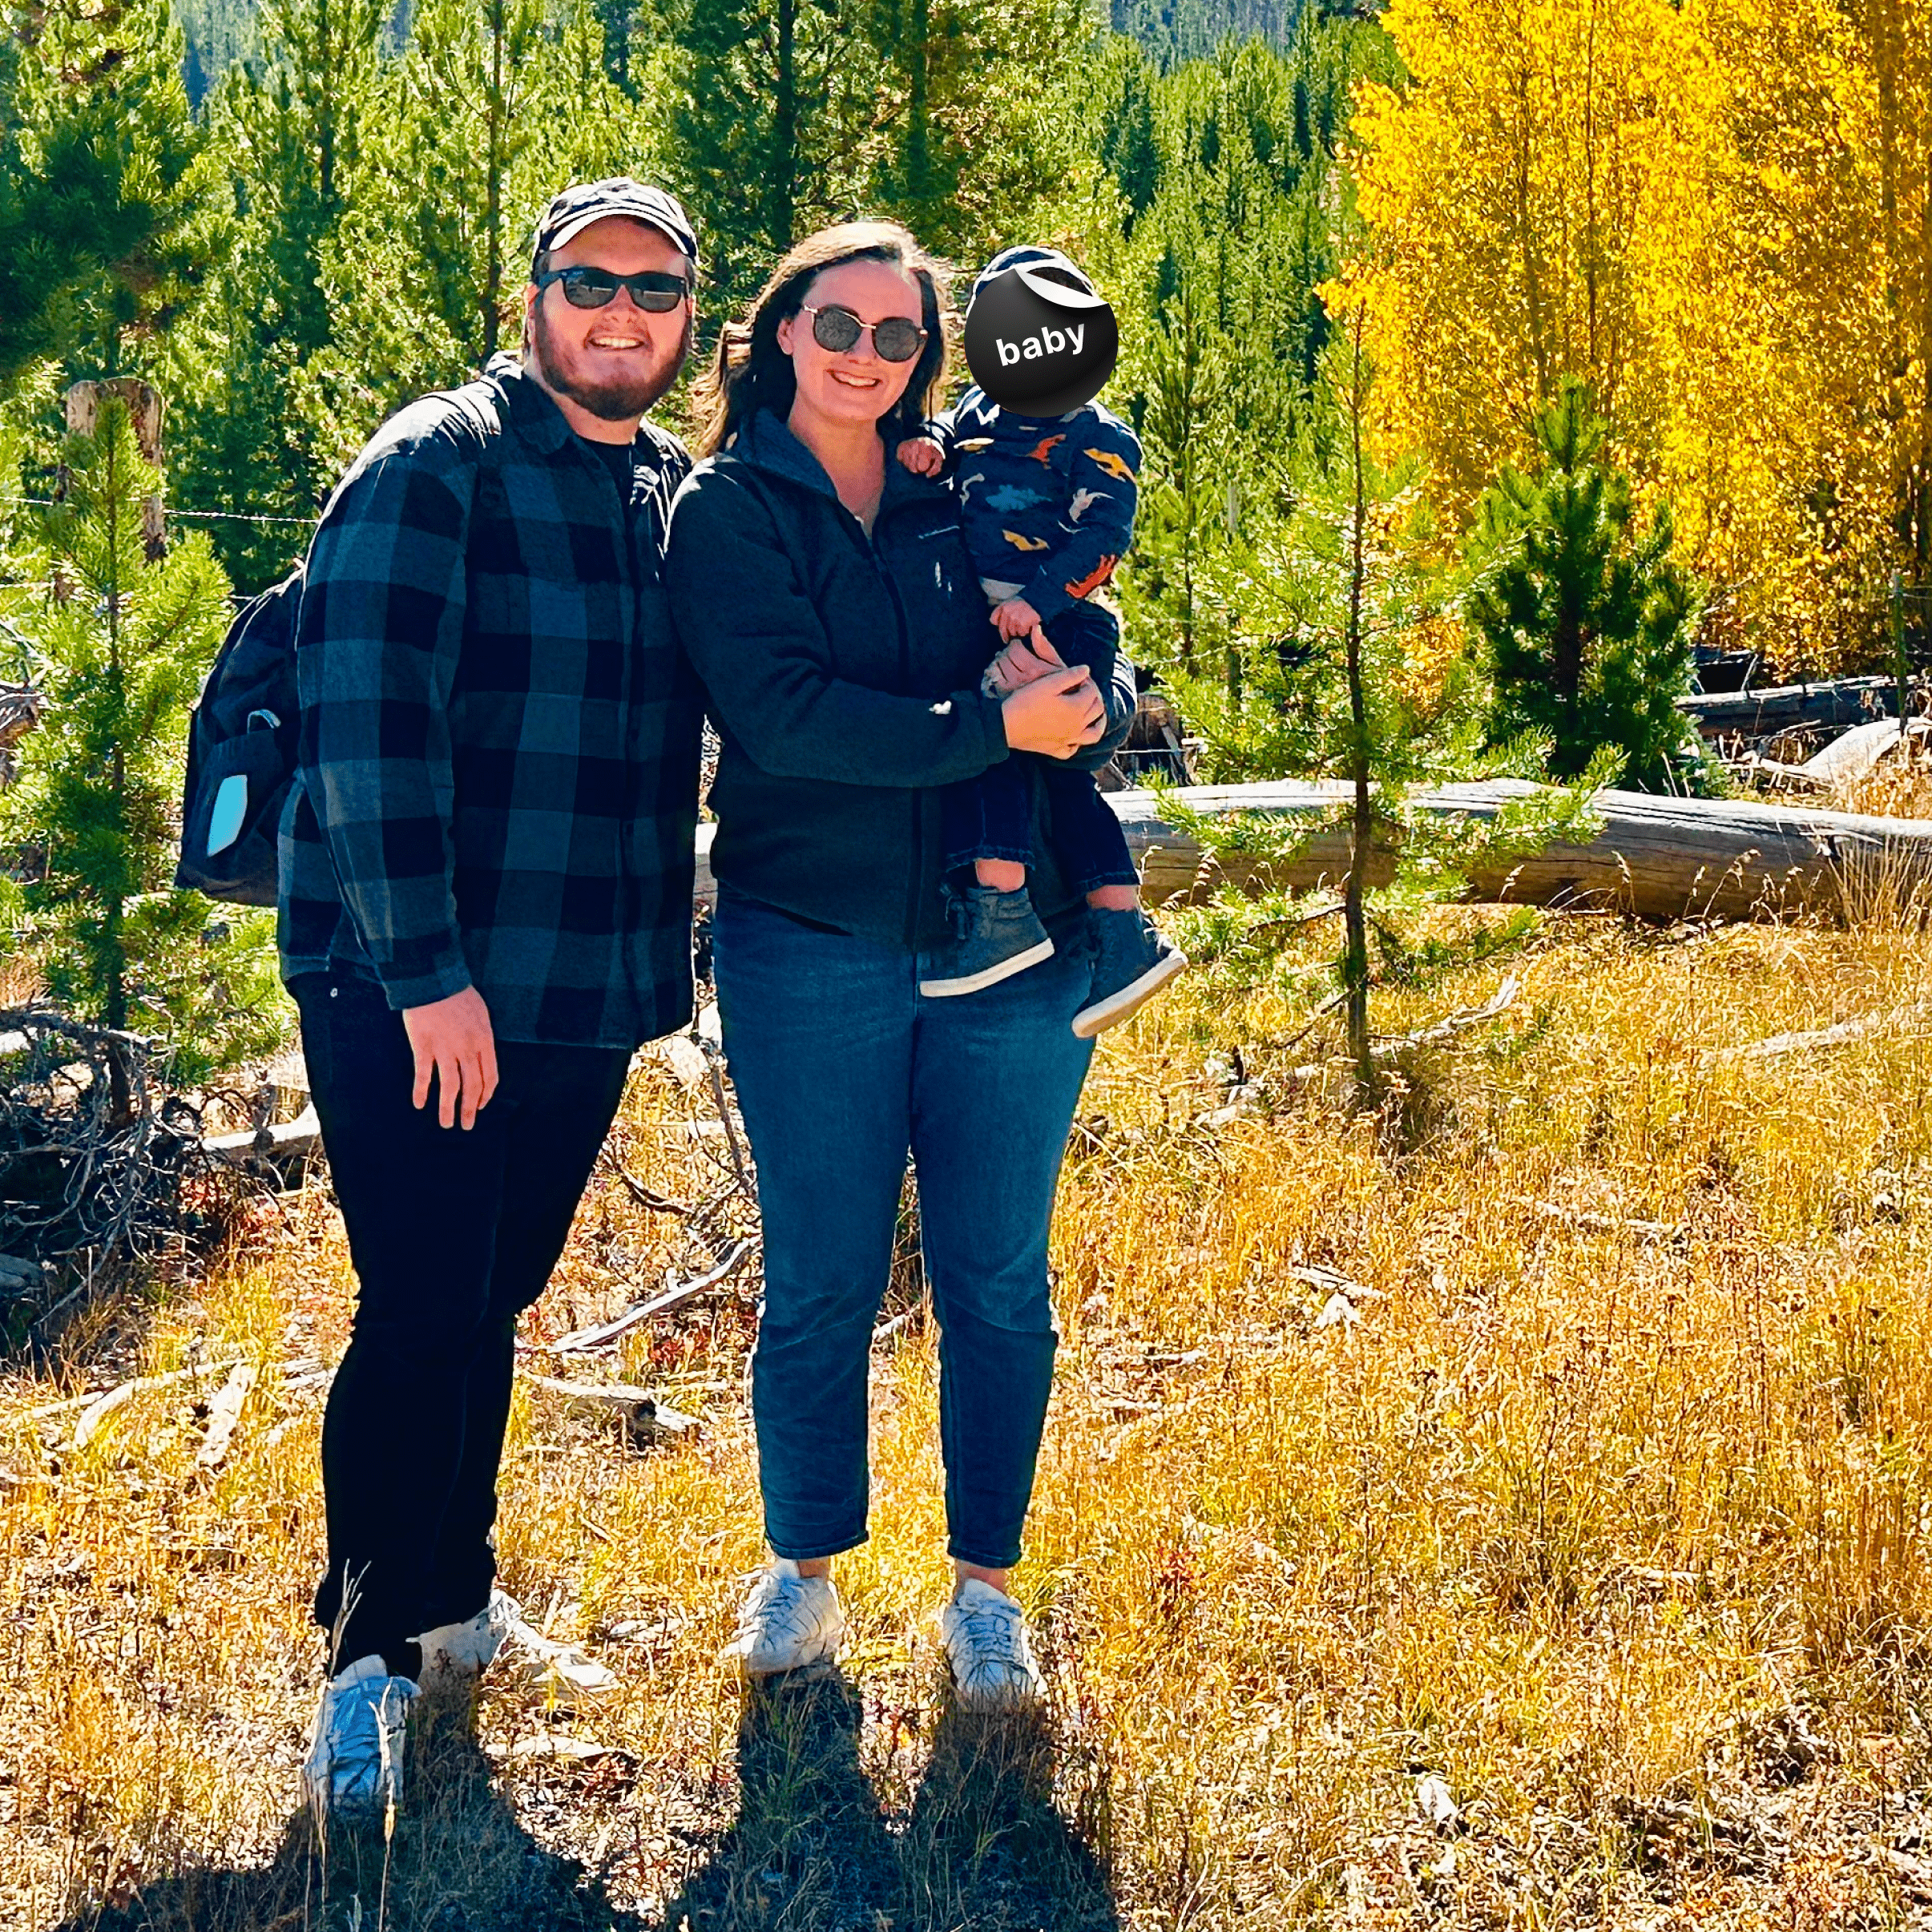 A cute family of my entire family in the mountains, surrounded by aspen trees.